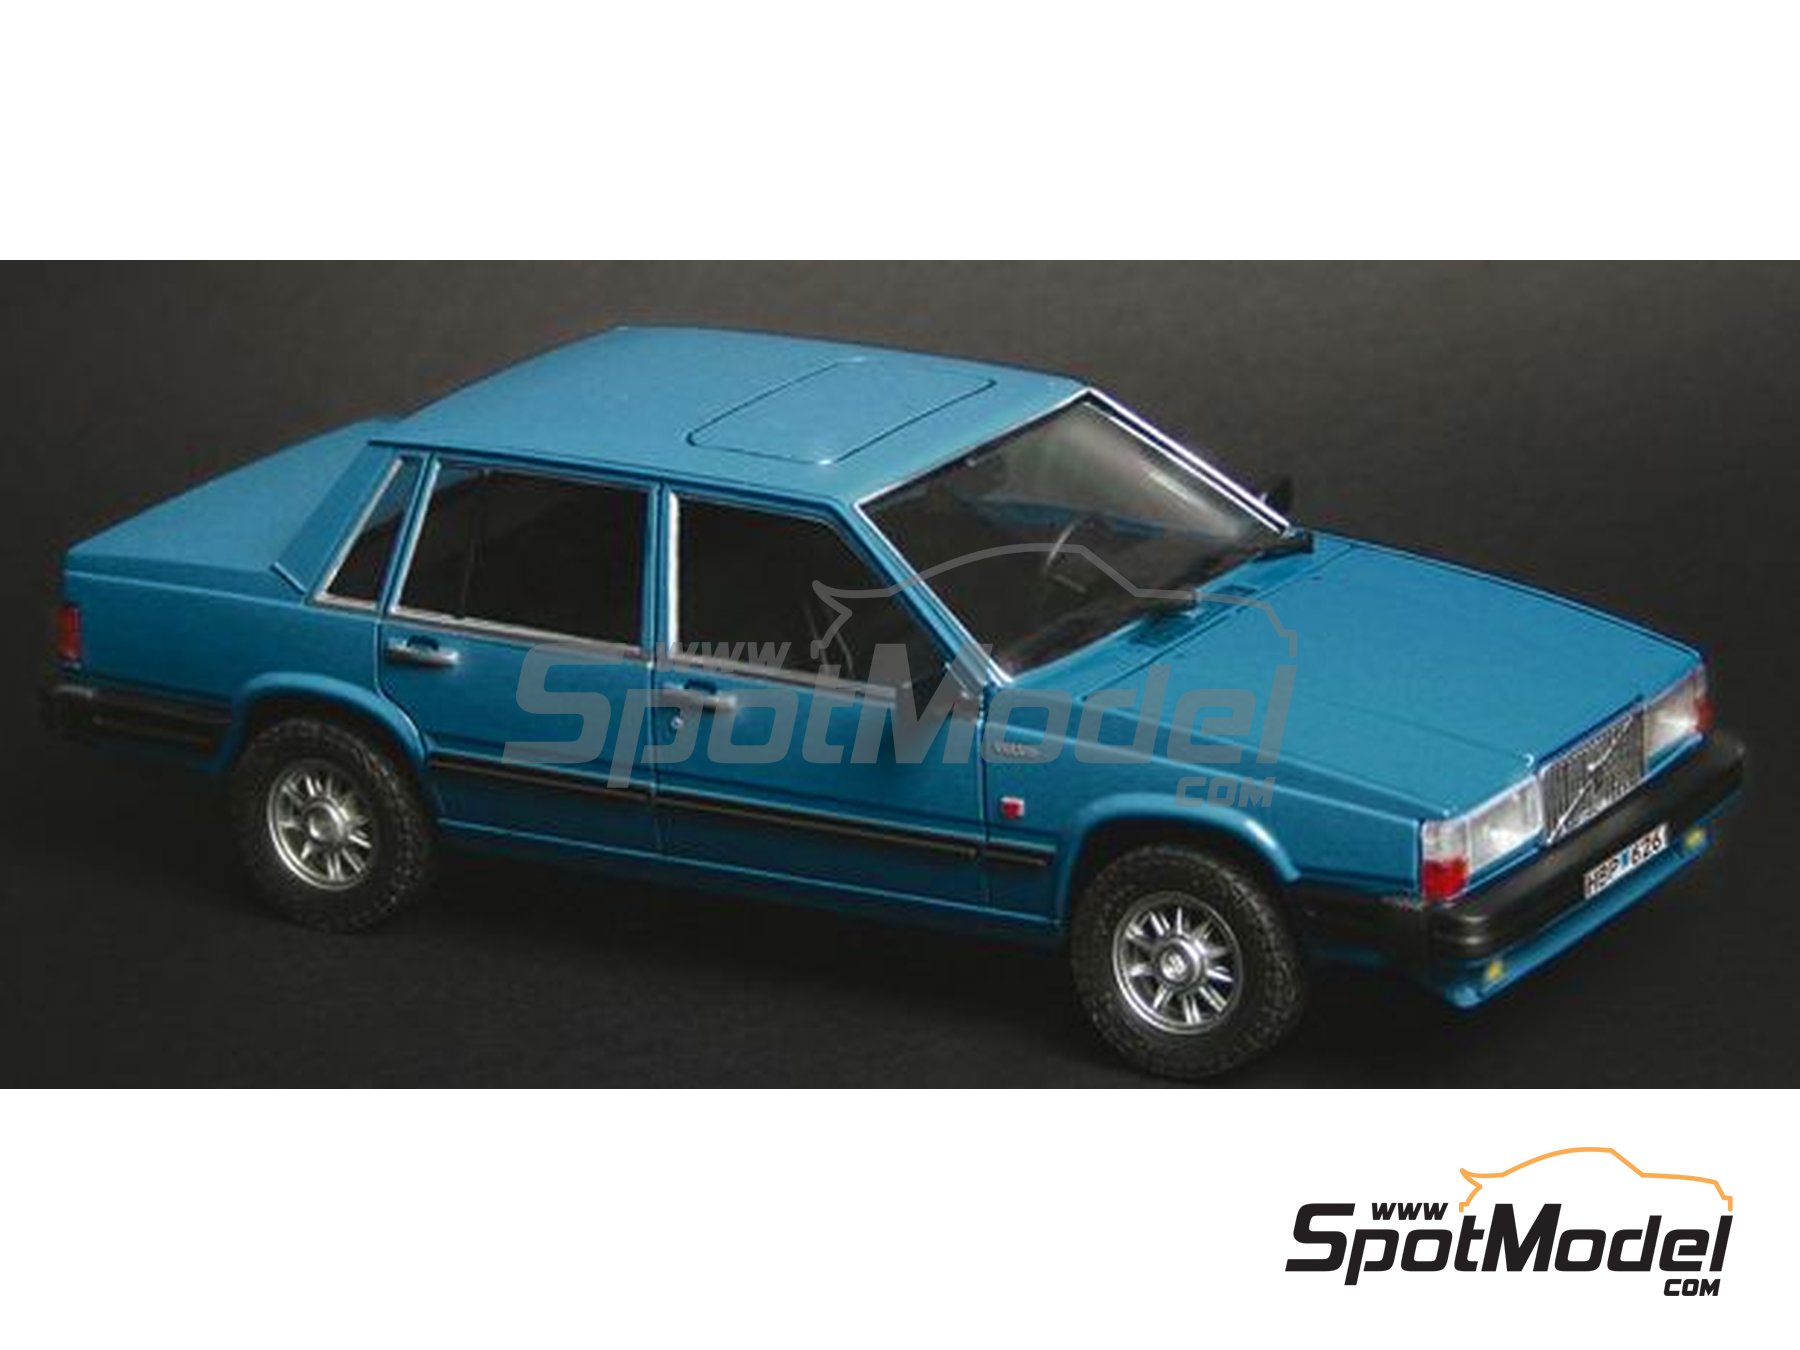 Vintage VOLVO 760 Turbo PLAYKIT Snap Together Model Toy "4 Made in Italy for sale online 